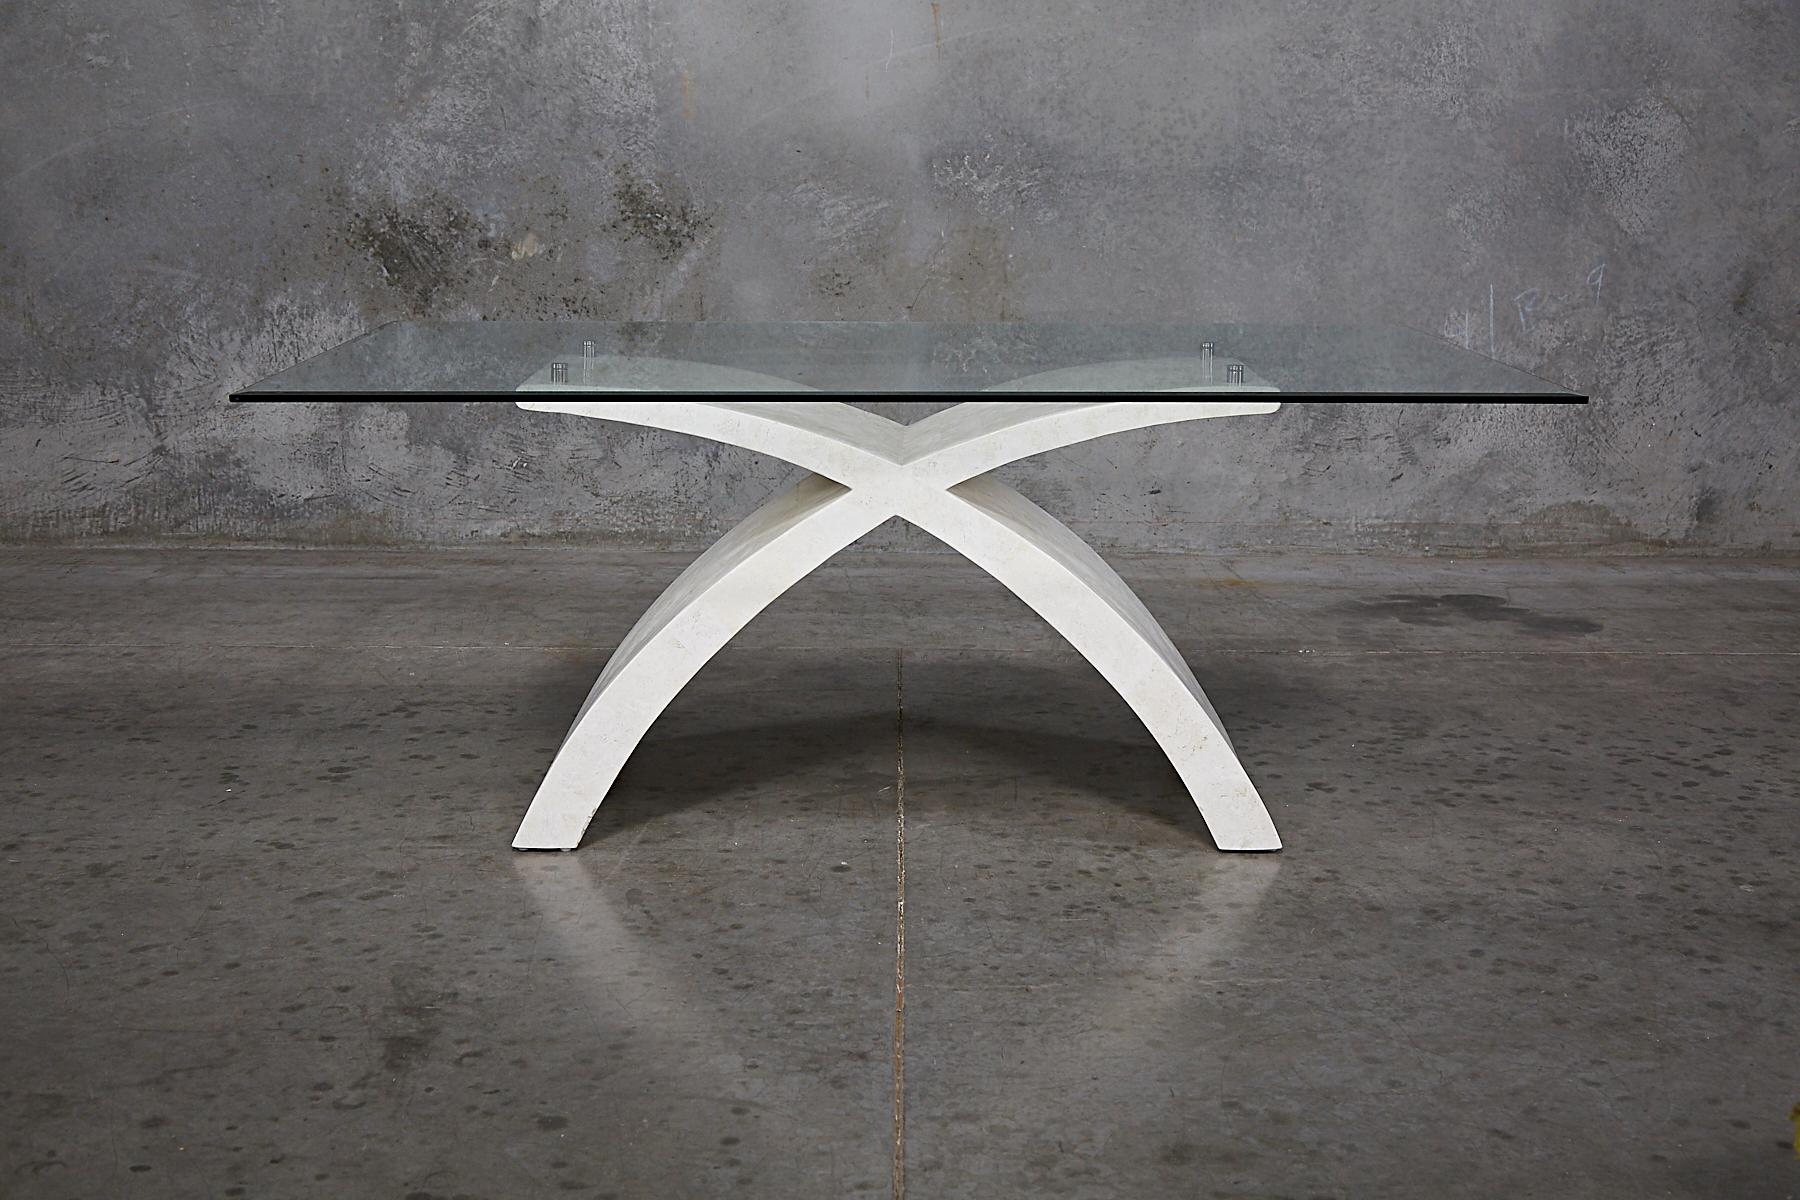 Tessellated white stone hand-inlaid over a fiberglass body. X-shaped base supports a rectangular glass top with stainless steel fittings.

All furnishings are made from 100% natural Fossil Stone or Seashell inlay, carefully hand cut and crafted